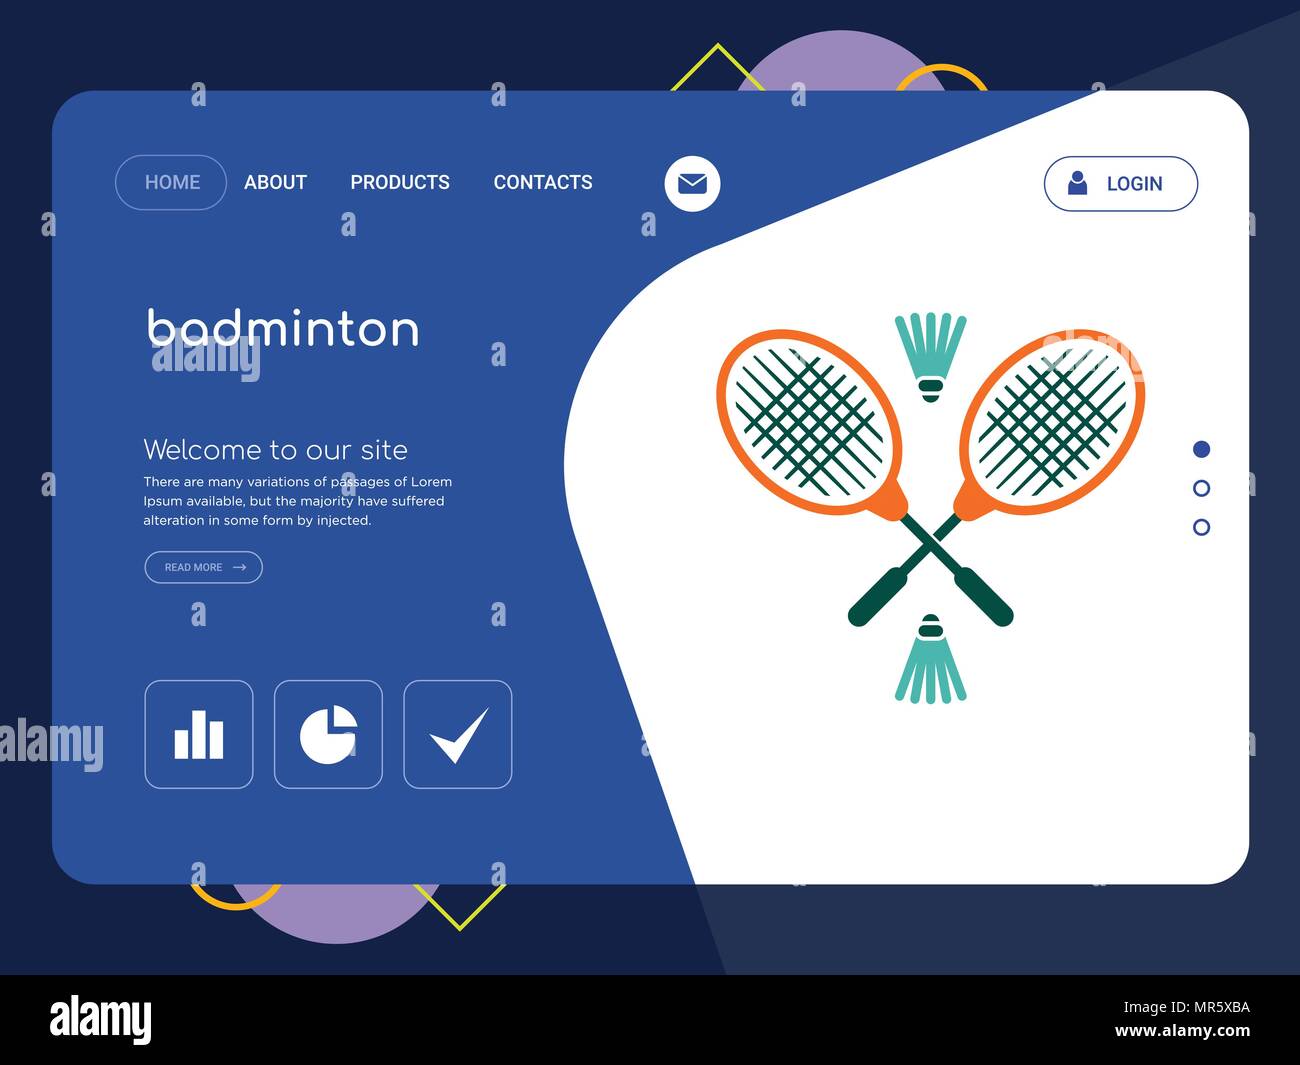 exegese schoenen steak Quality One Page badminton Website Template Vector Eps, Modern Web Design  with flat UI elements and landscape illustration, ideal for landing page  Stock Vector Image & Art - Alamy